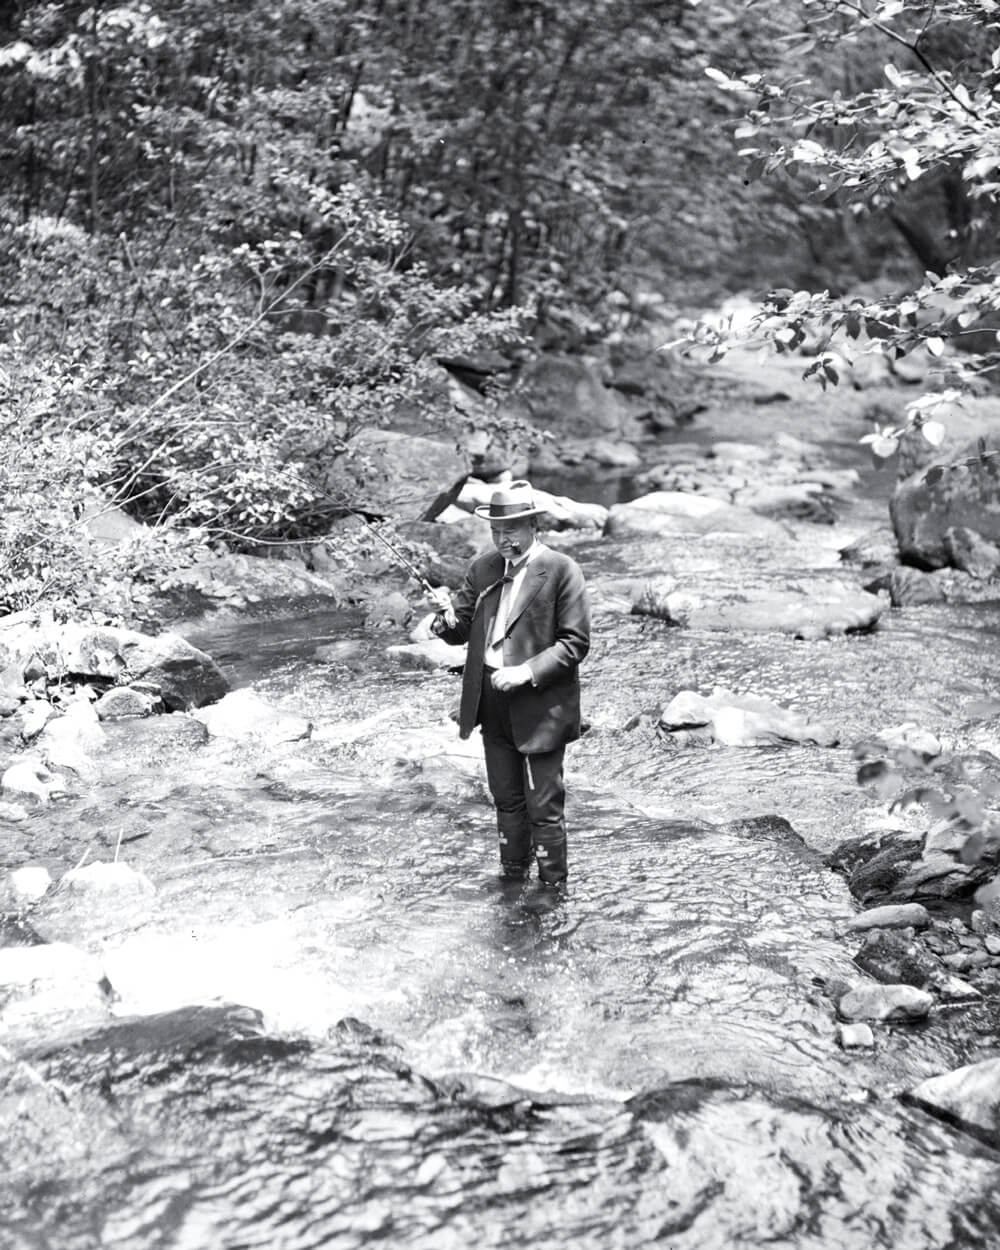 Postpresidential fishing. Herbert Hoover tries his luck, 1936. Photo Harris & Ewing. Courtesy Library of Congress.